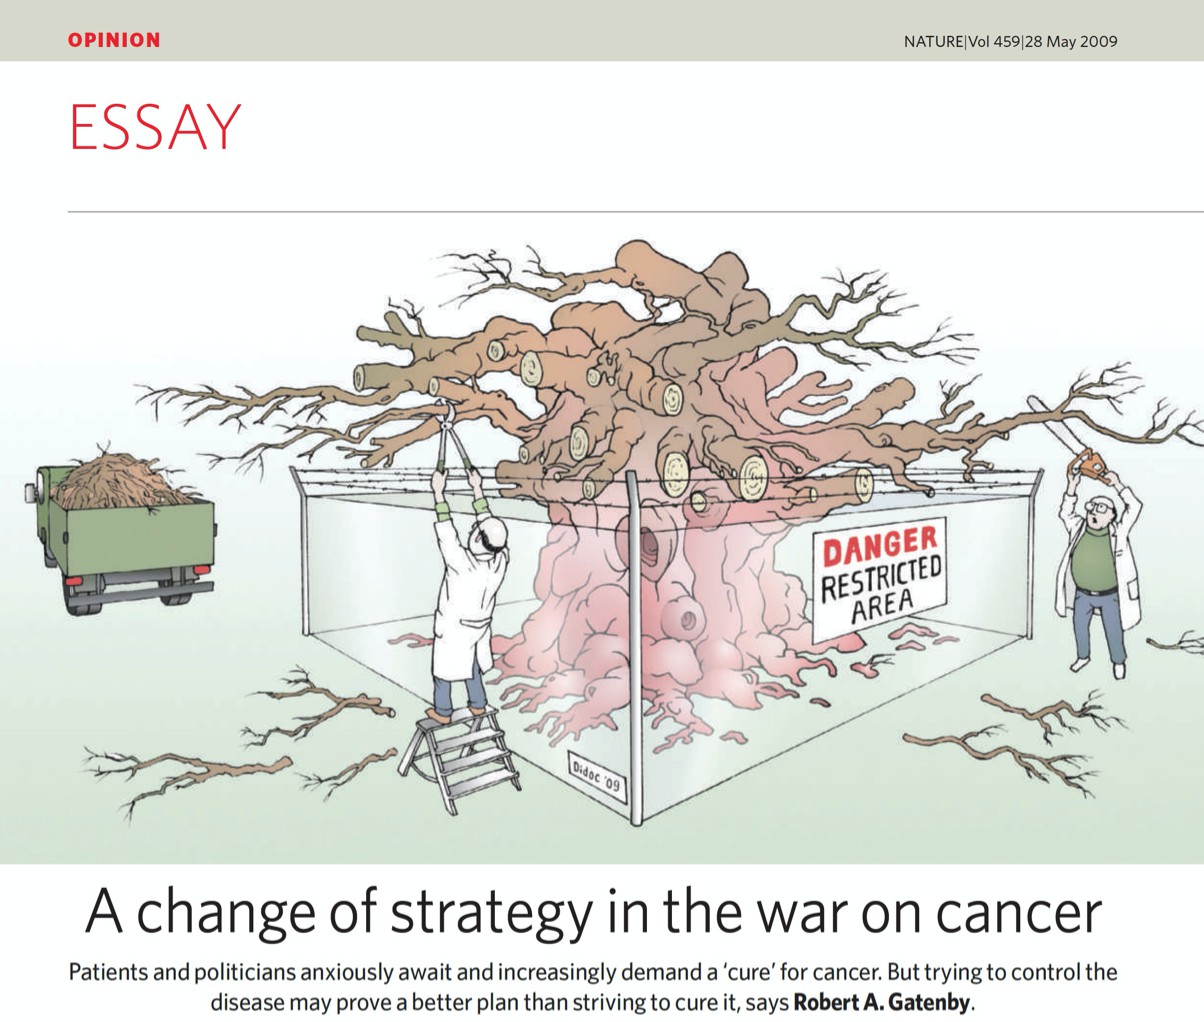 Reference: Robert (2009). "A change of strategy on the war on cancer."  Nature 459, pages 508–509.